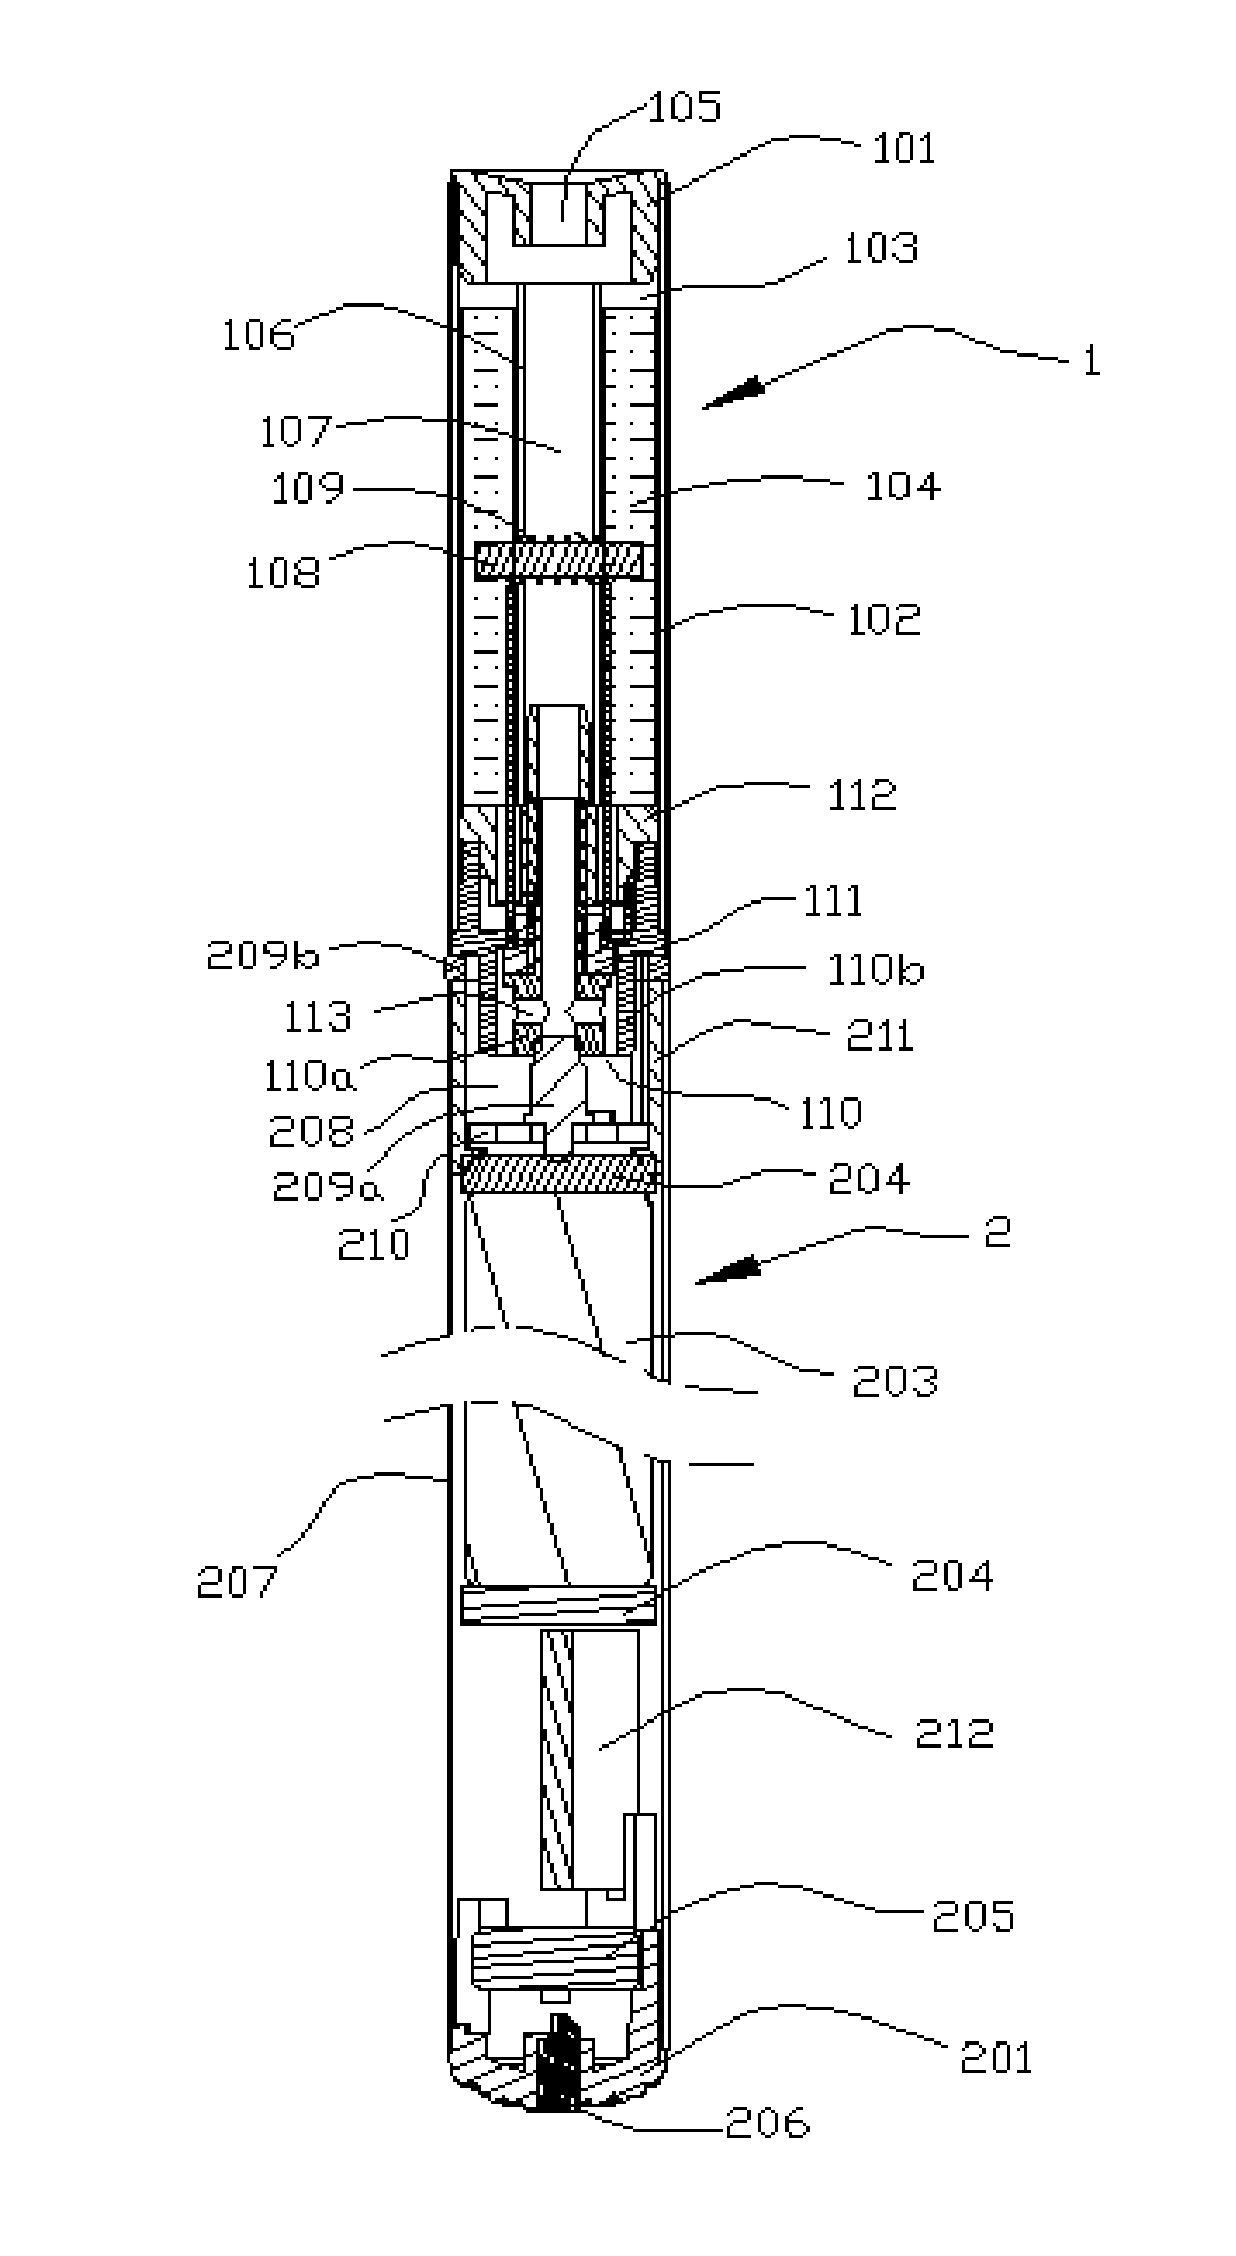 Electronic cigarette, atomizing device, power pole and charger connector